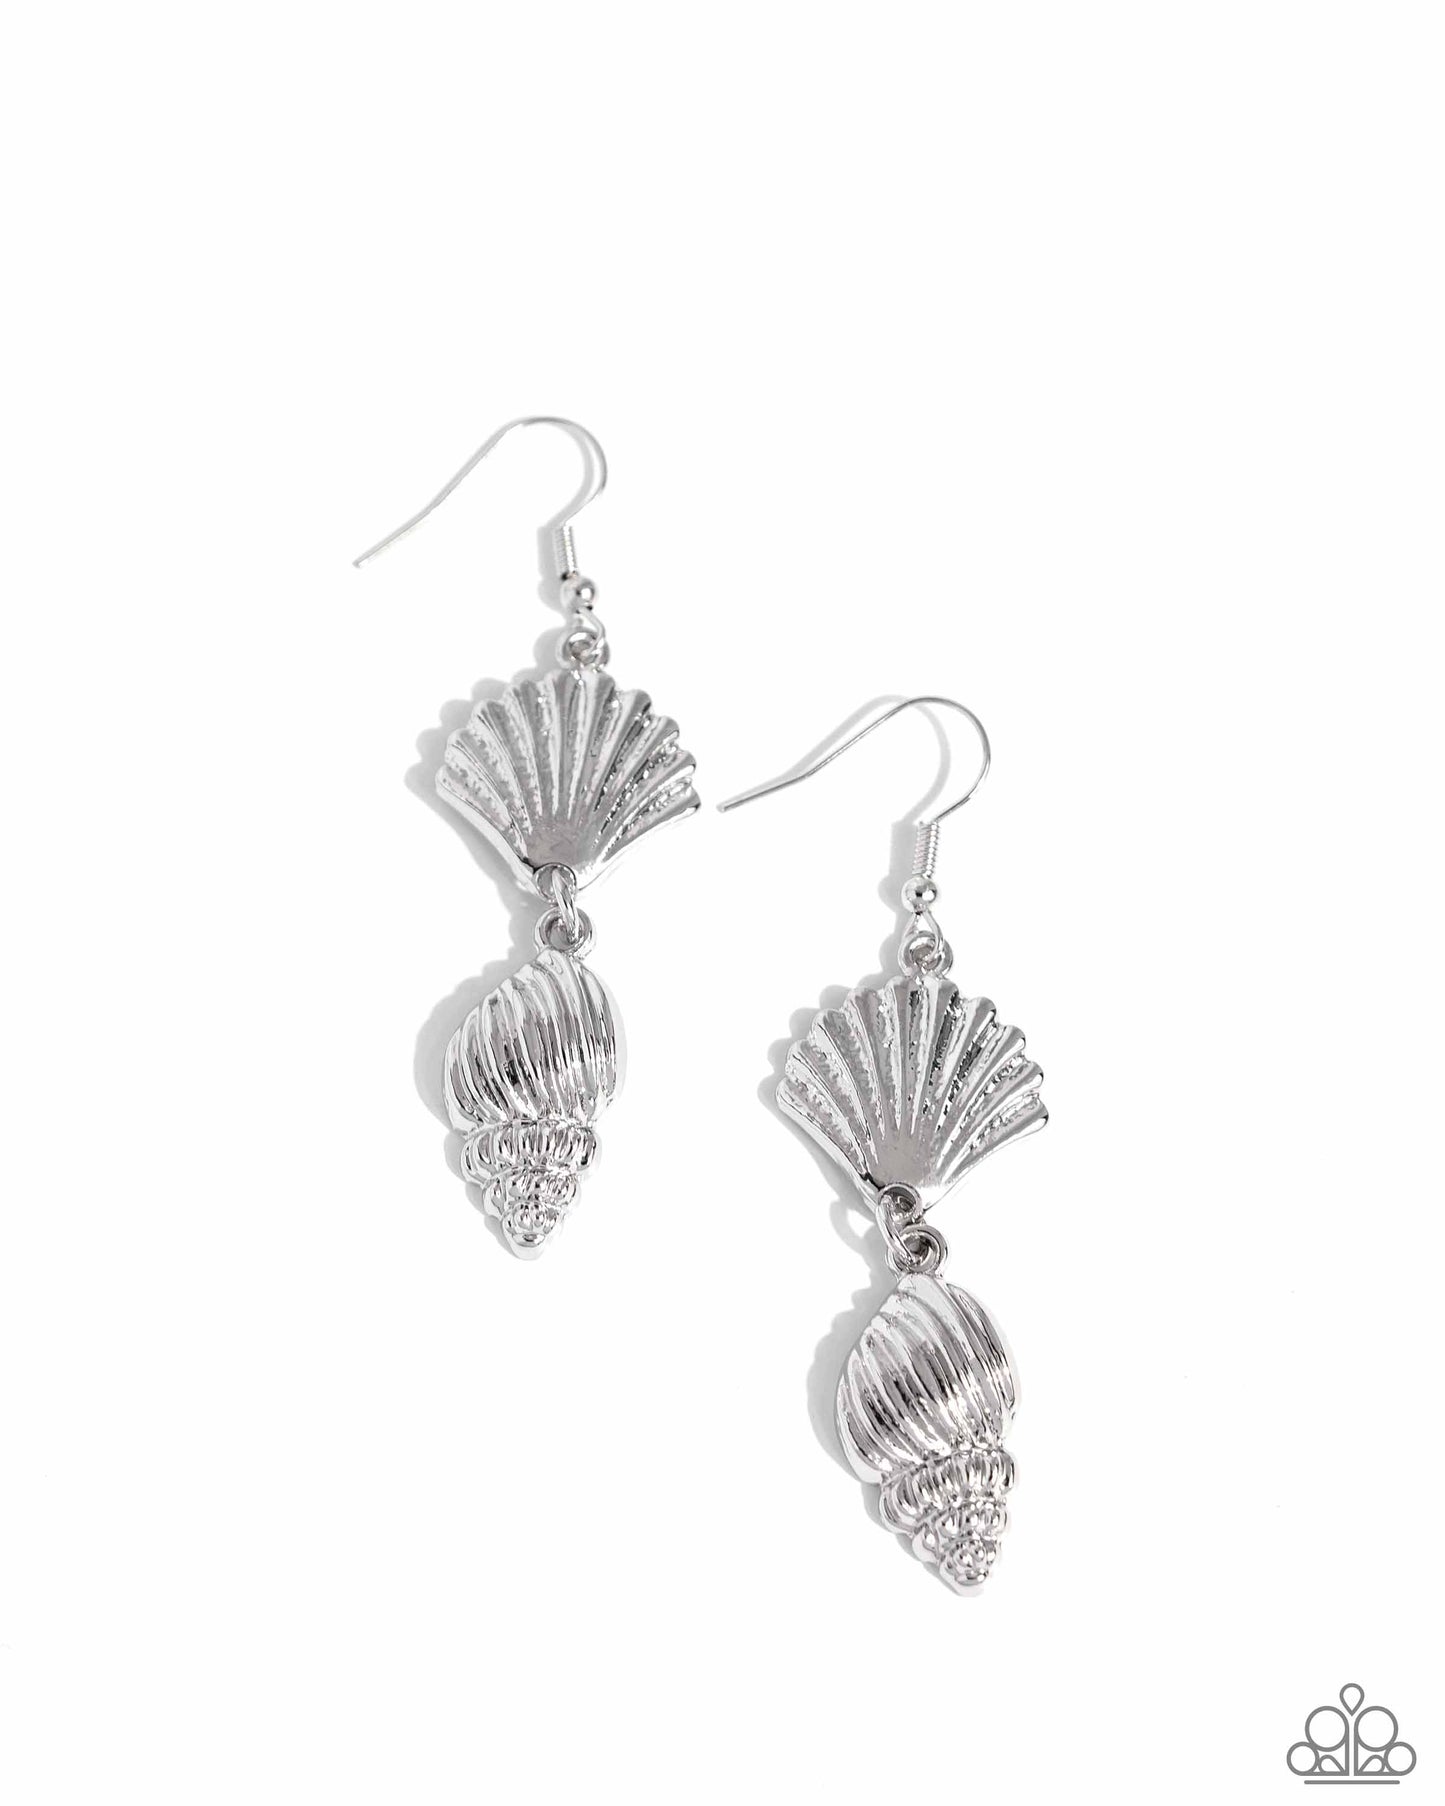 SHELL, I Was In the Area - Silver Earrings - Paparazzi Accessories - Textured silver seashells dangle and connect below the ear, creating a coastal centerpiece. Earring attaches to a standard fishhook fitting. Sold as one pair of earrings.